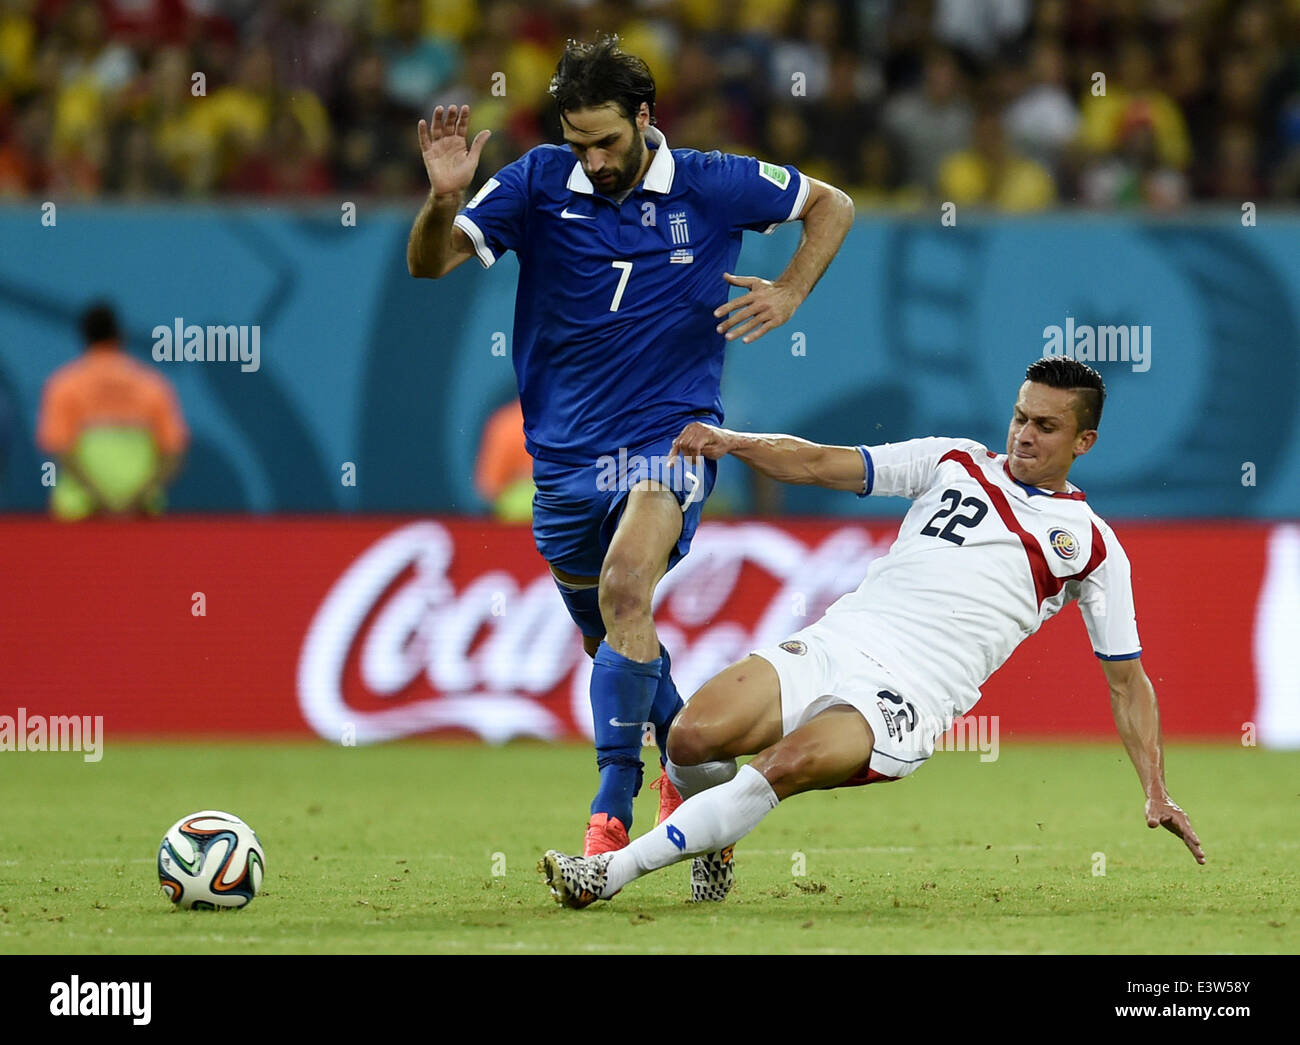 Recife, Brazil. 29th June, 2014. Costa Rica's Jose Miguel Cubero (R) vies with Greece's Giorgios Samaras during a Round of 16 match between Costa Rica and Greece of 2014 FIFA World Cup at the Arena Pernambuco Stadium in Recife, Brazil, on June 29, 2014. Credit:  Yang Lei/Xinhua/Alamy Live News Stock Photo